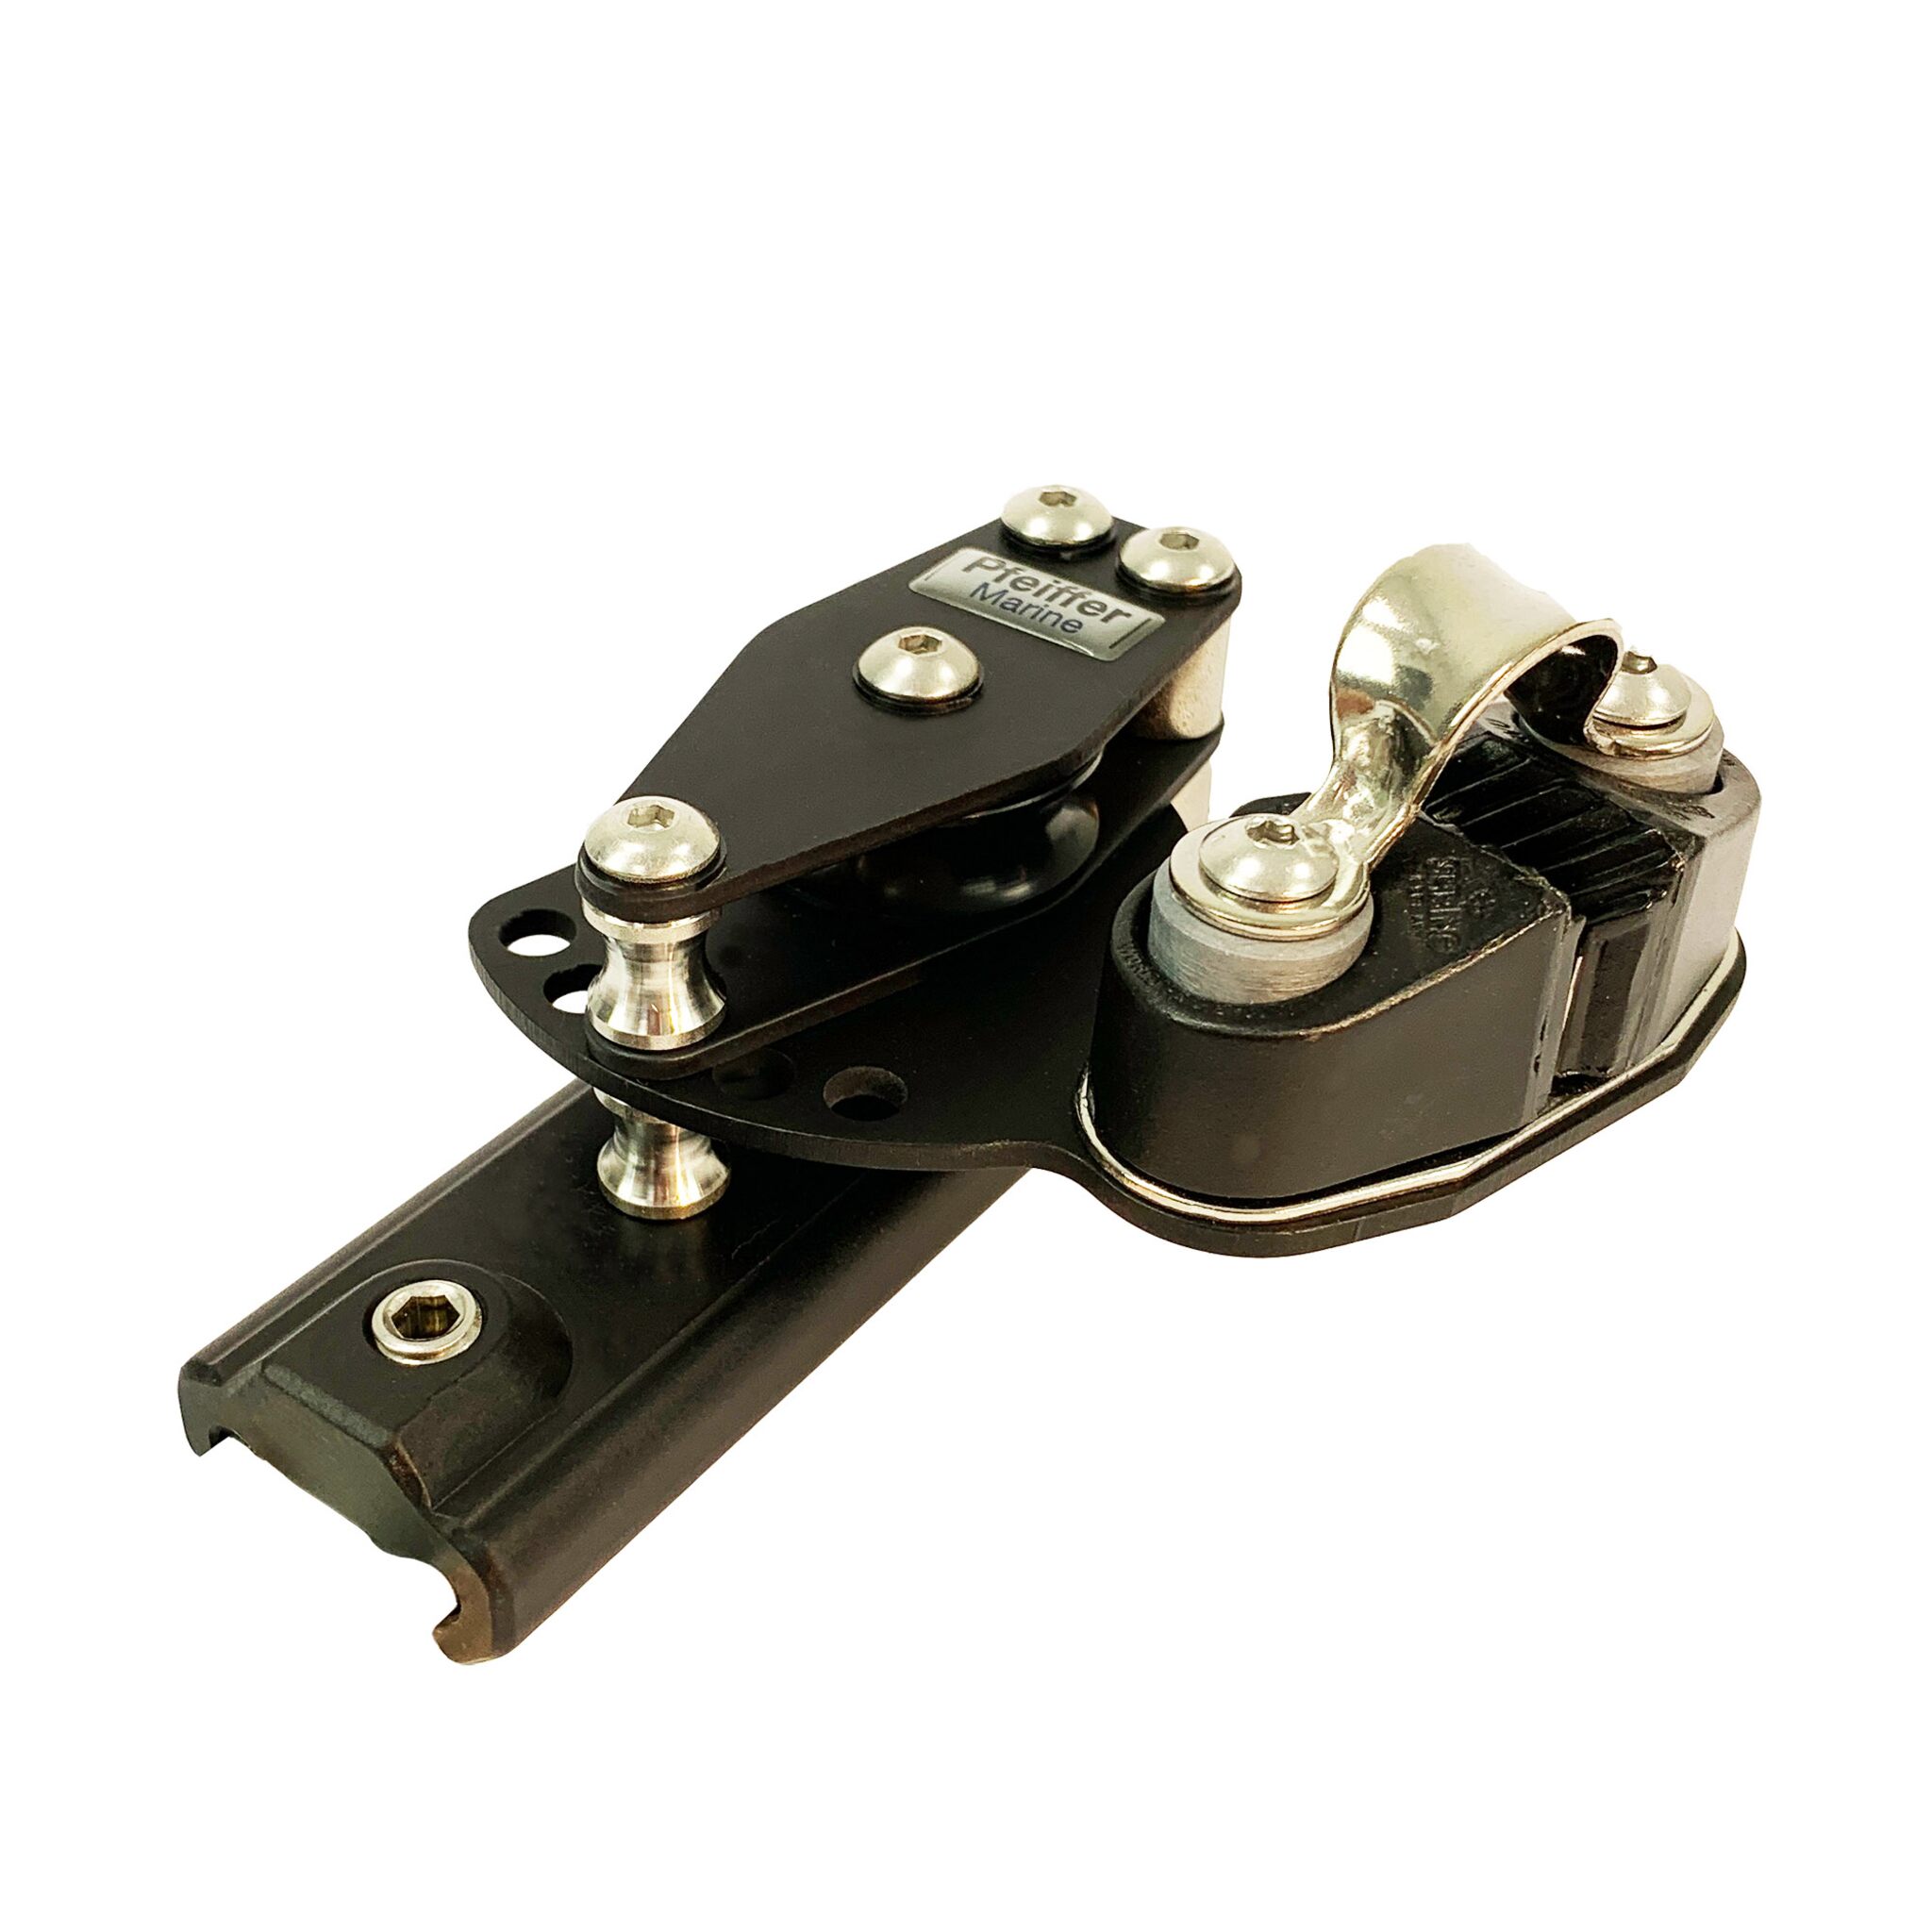 Pfeiffer Traveller Control Block with Clamp